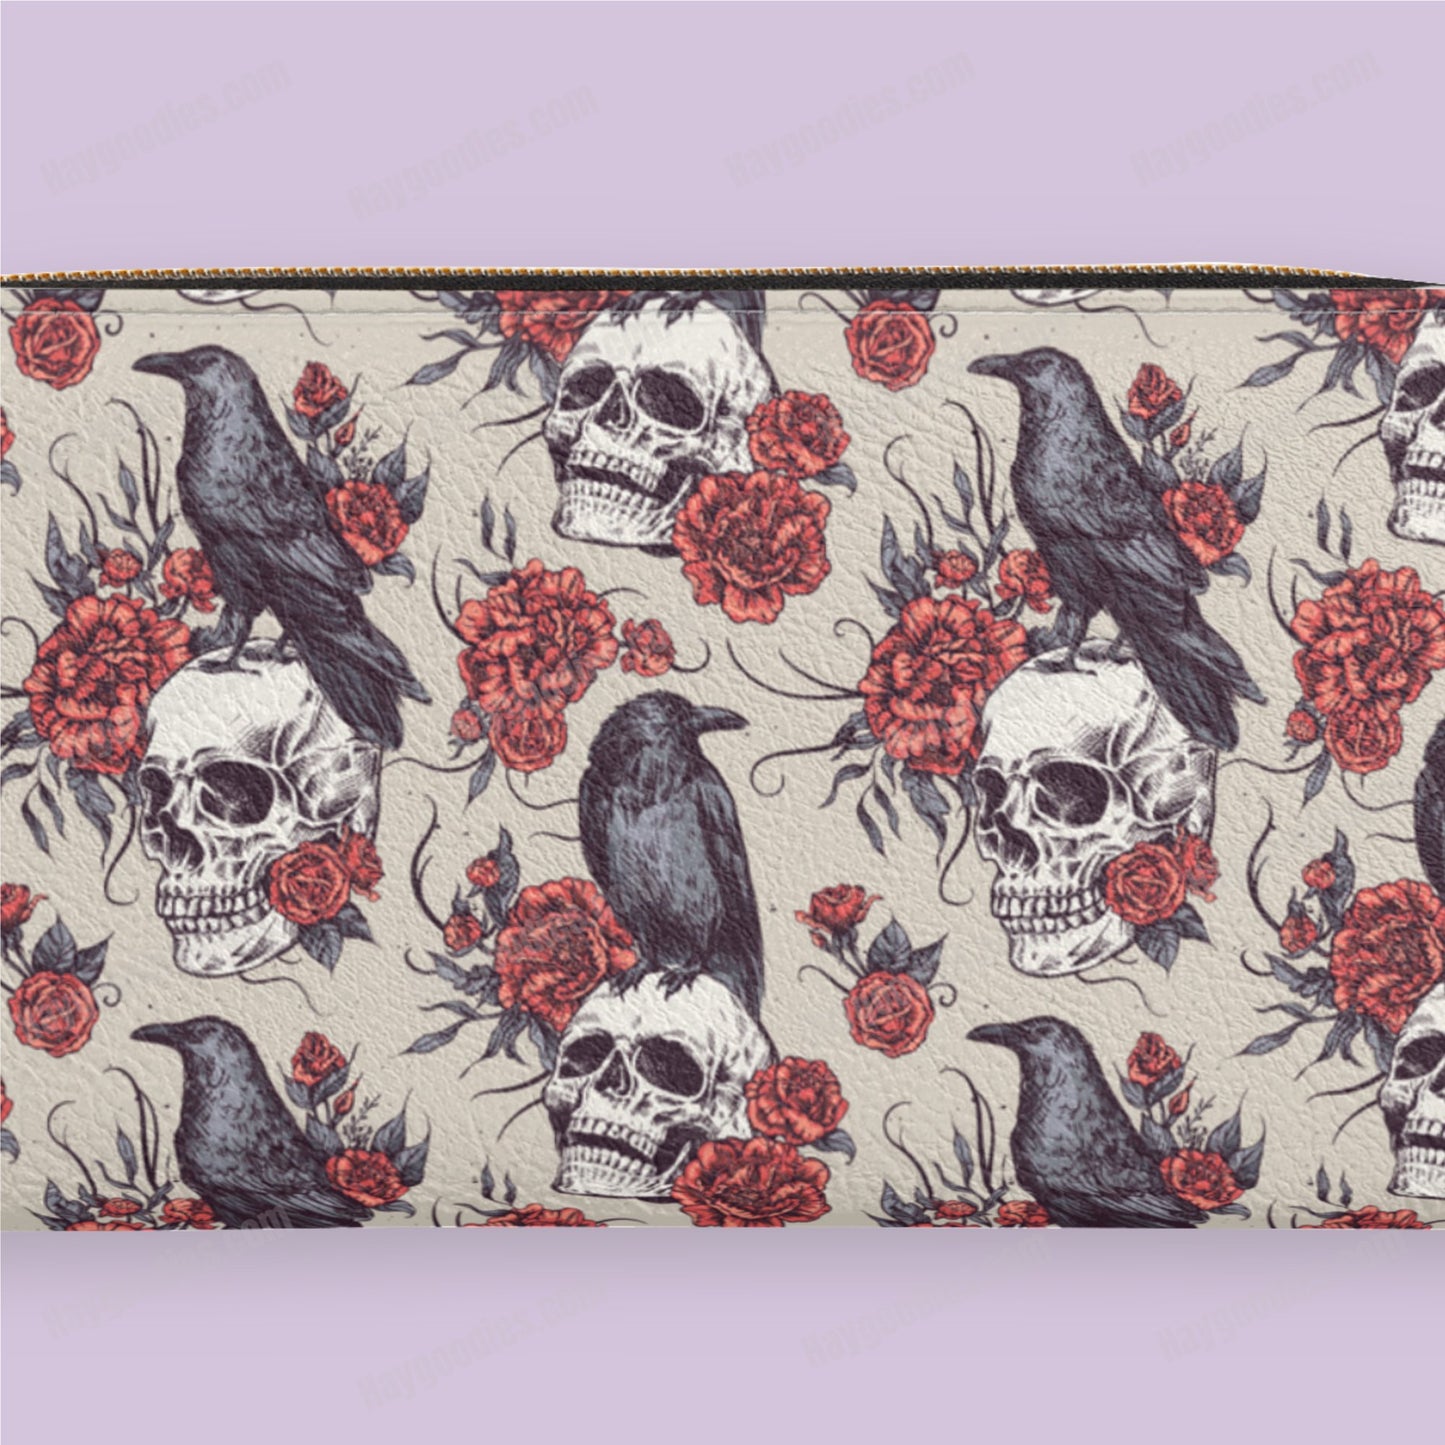 Skull, Crows and Roses Zipper Purse - HayGoodies - purse